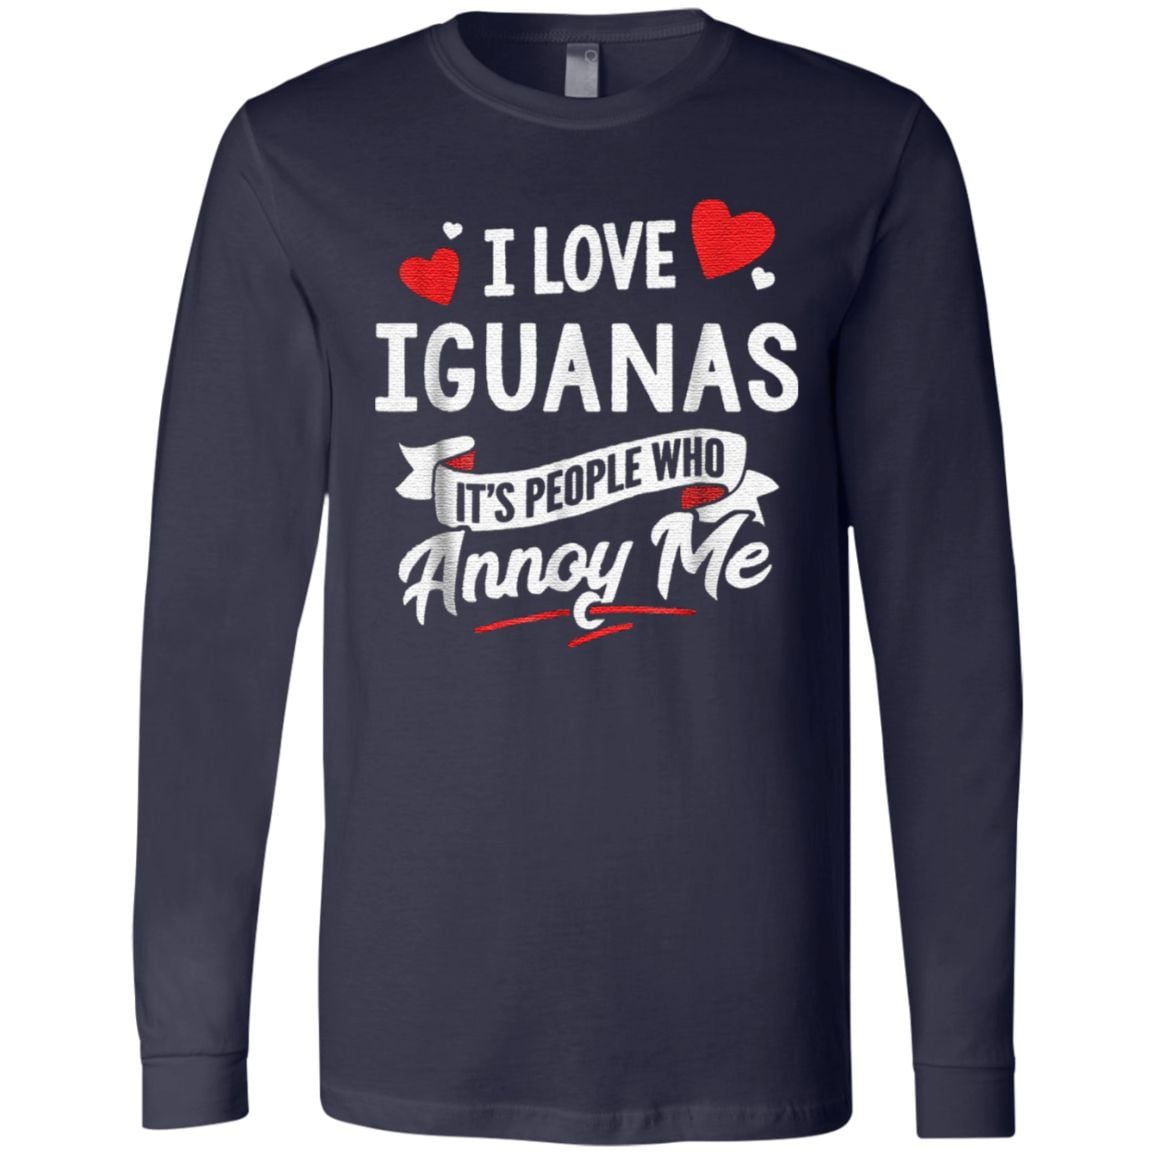 I Love Iguanas – It’s People Who Annoy Me TShirt